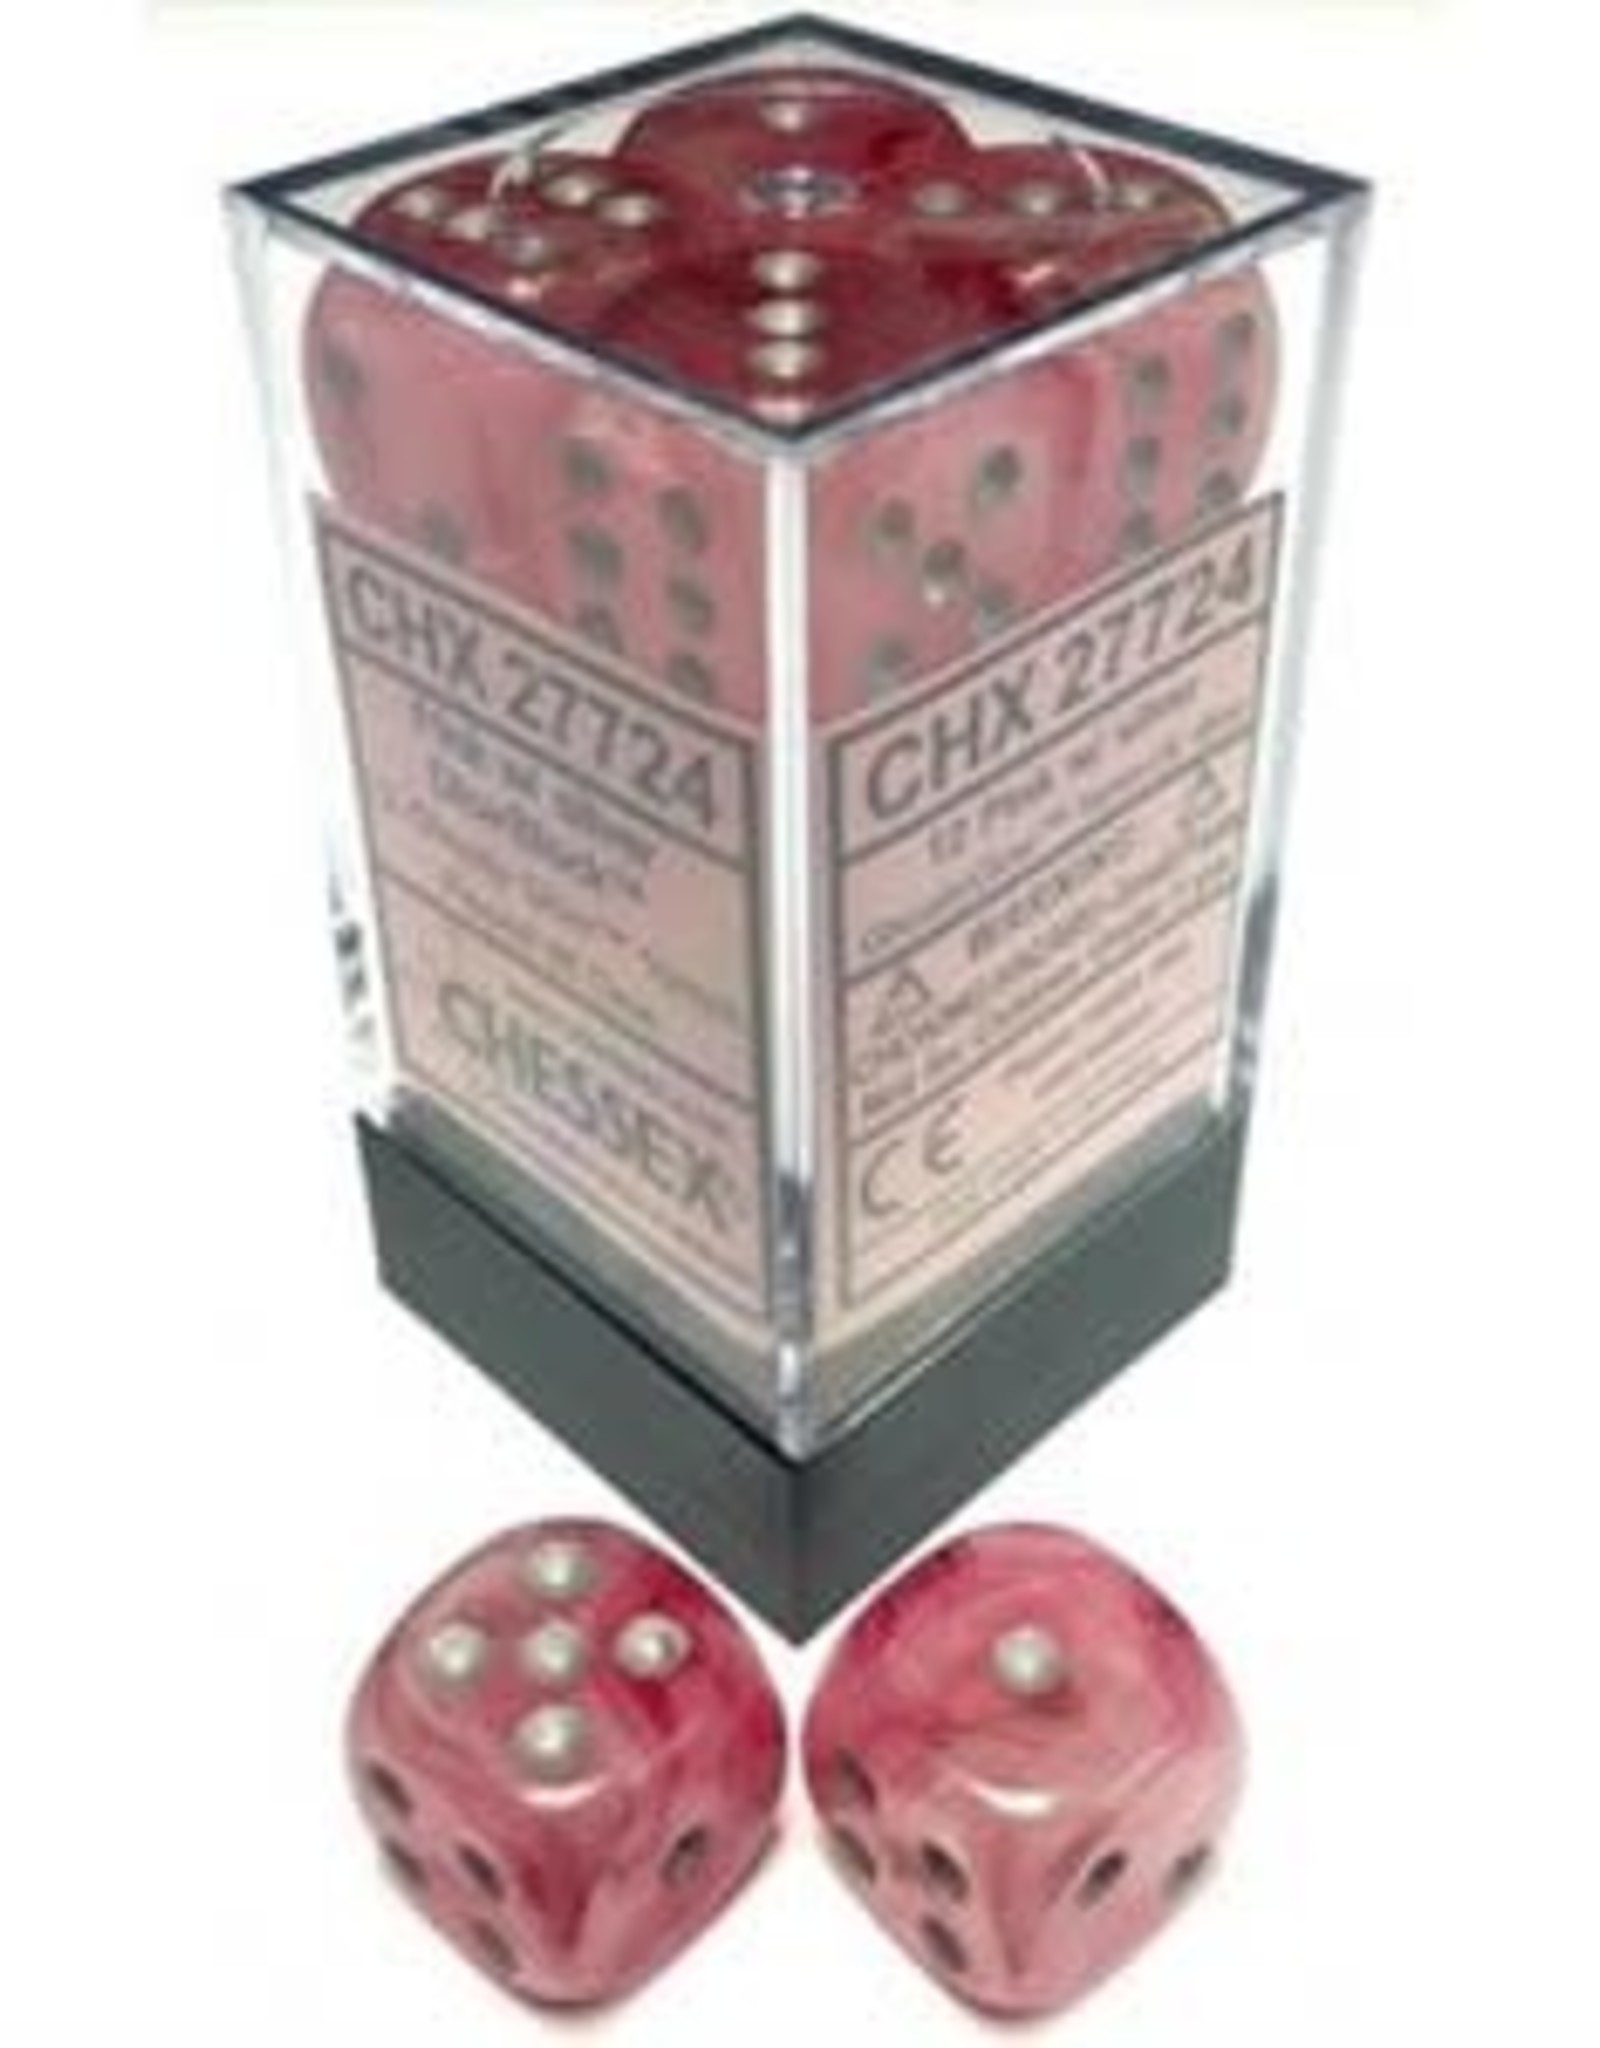 Chessex Dice - 12D6 Ghostly Glow Pink / Silver (Glow)